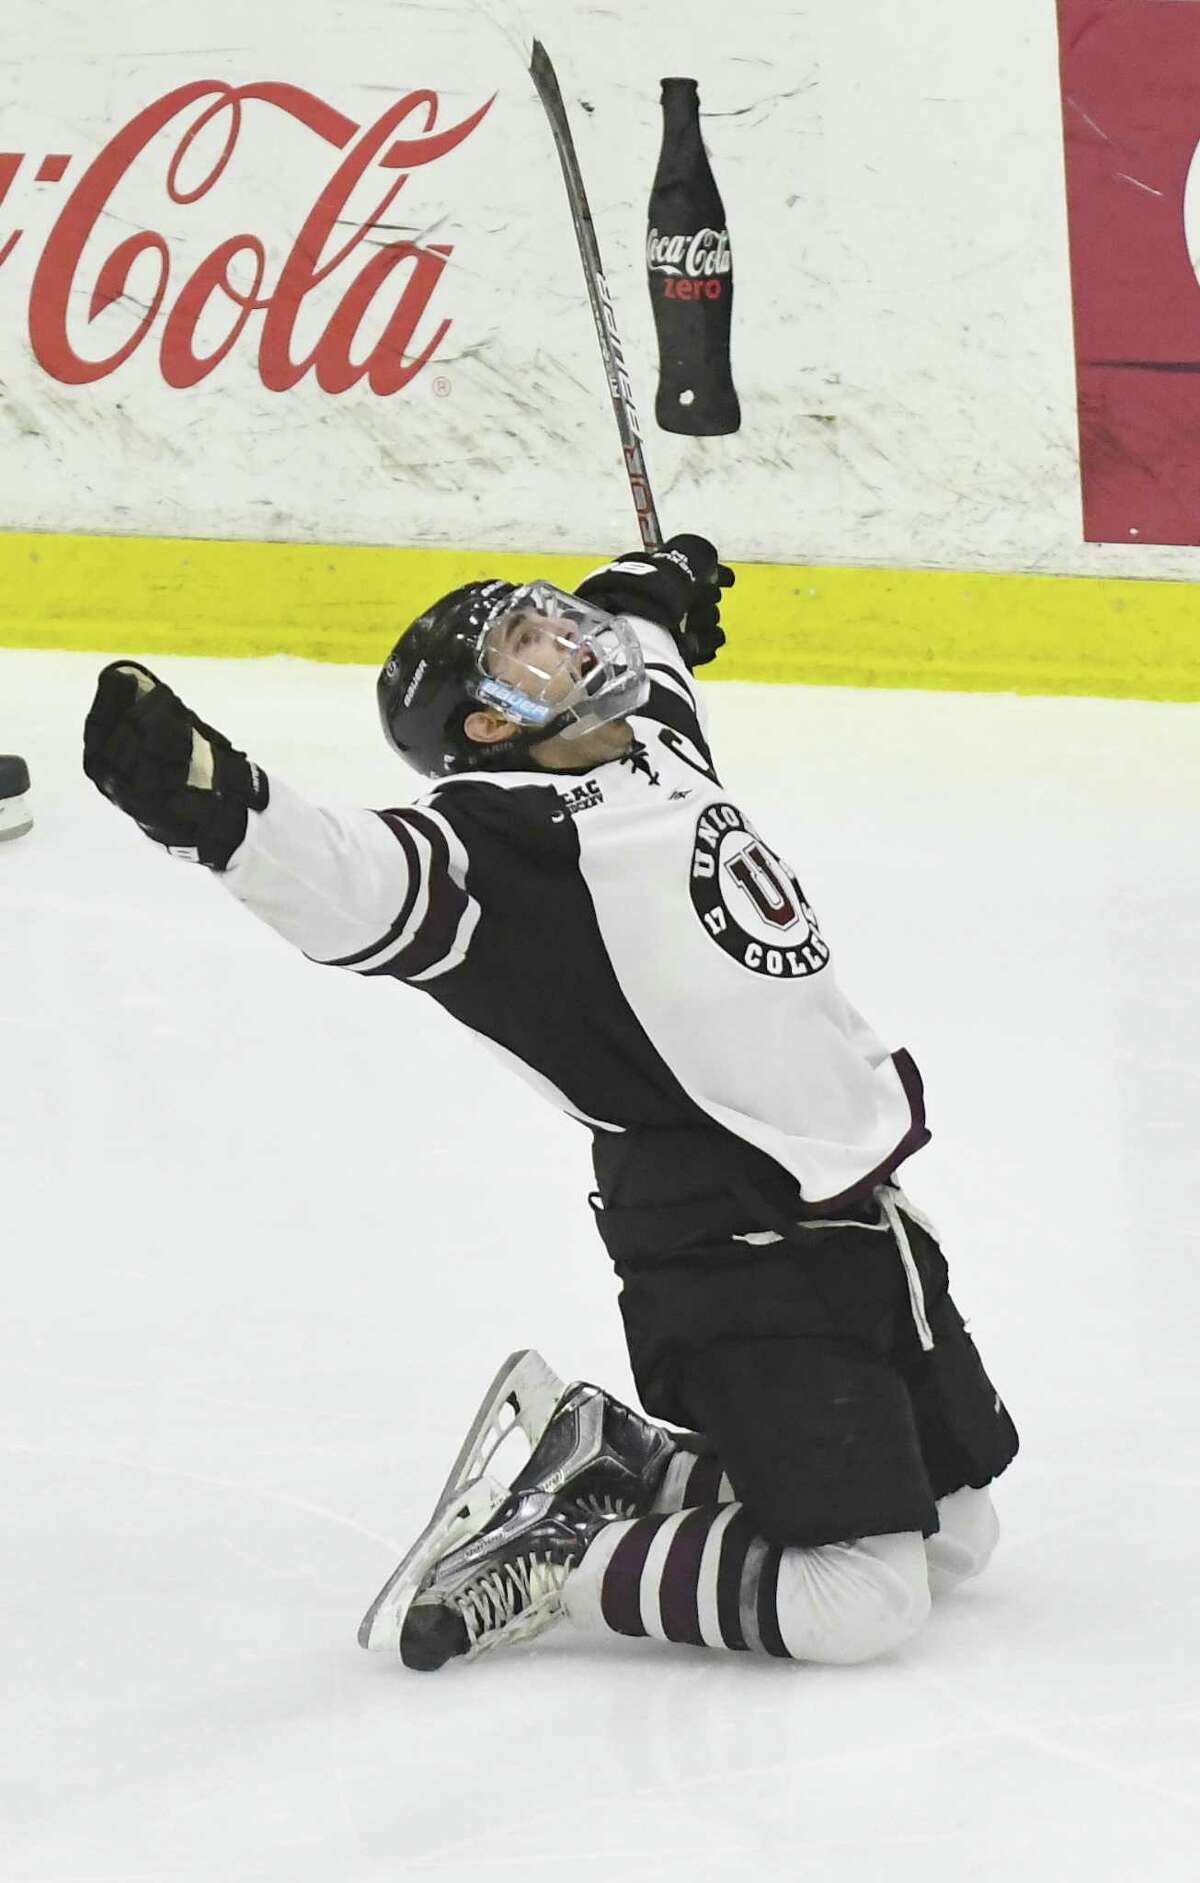 Union's Mike Vecchione (21) celebrates his game winning goal against Princeton goaltender Colton Phinney during the first overtime period of a NCAA hockey quarterfinal game of the ECAC conference in Schenectady, N.Y., Saturday, March 11, 2017. Union won 4-3. (Hans Pennink / Special to the Times Union) ORG XMIT: HP116 ORG XMIT: MER2017031122050801